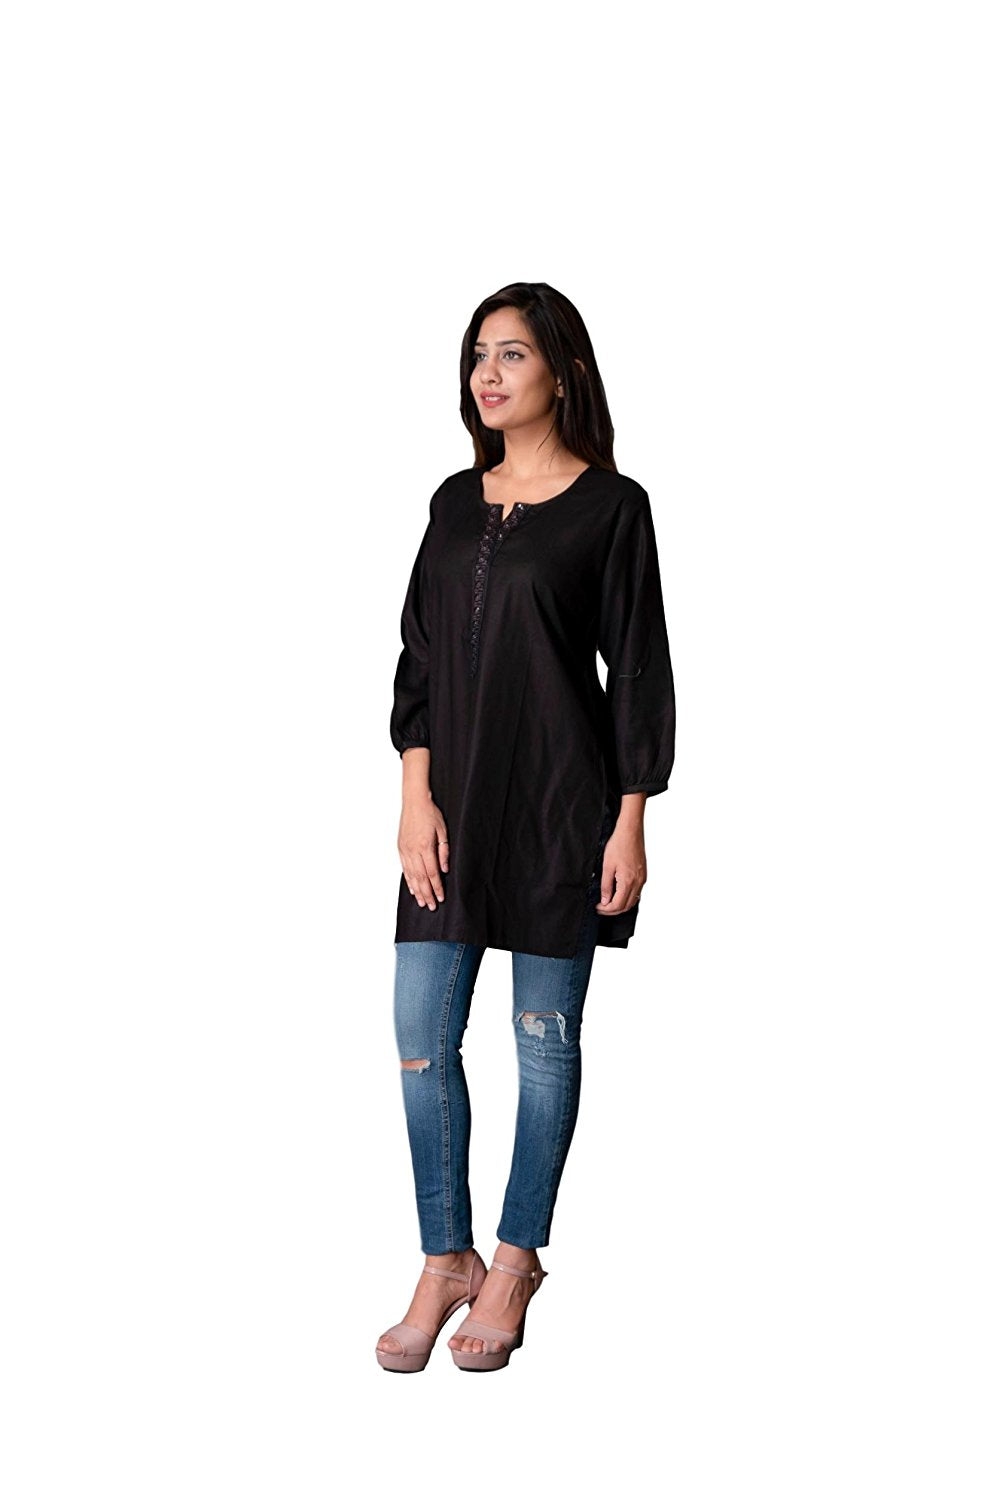 Short Kurti for Women: The Perfect Blend of Style and Comfort